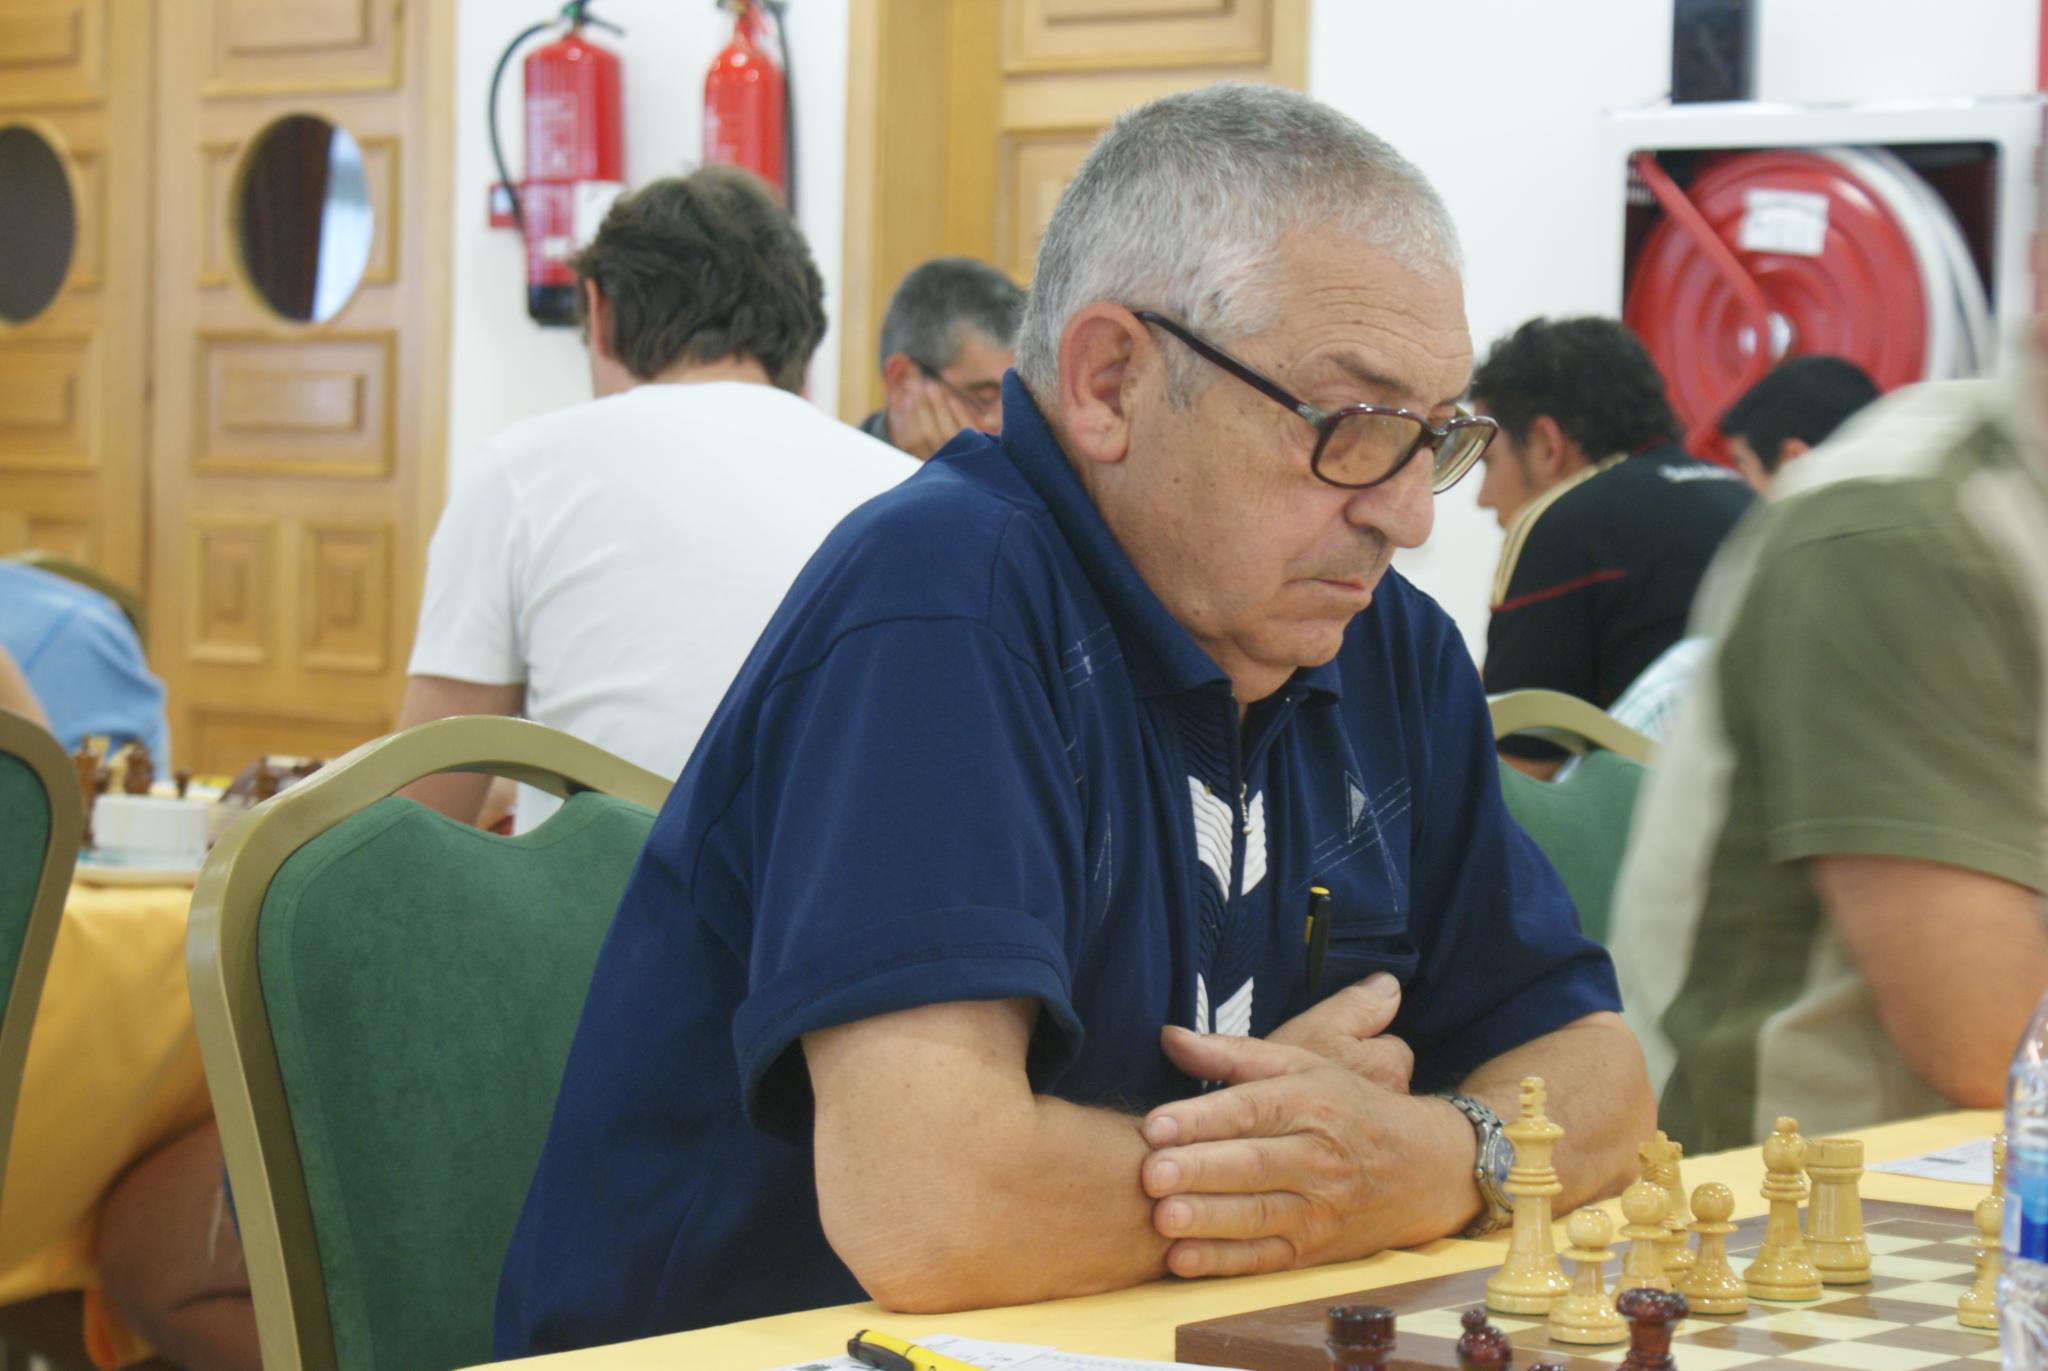 a man playing chess in a room with people sitting around